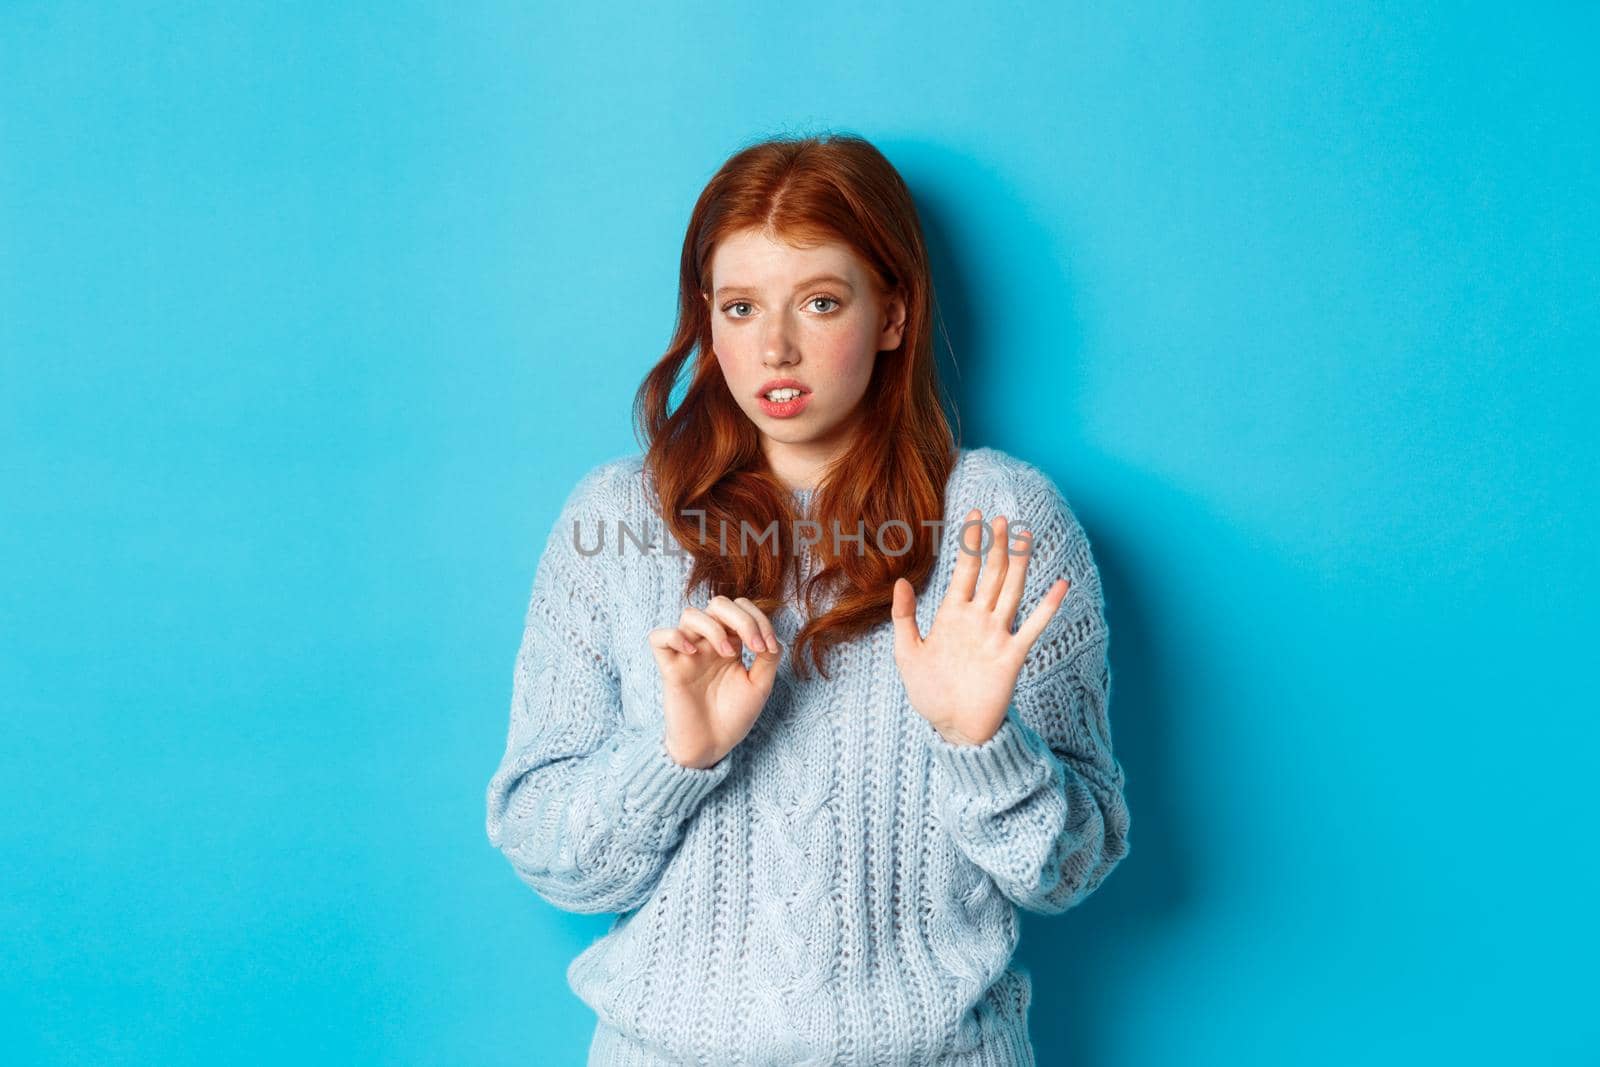 Worried redhead girl refusing or declining an offer, shaking hands and looking anxiously at camera, rejecting something unpleasant, standing over blue background.